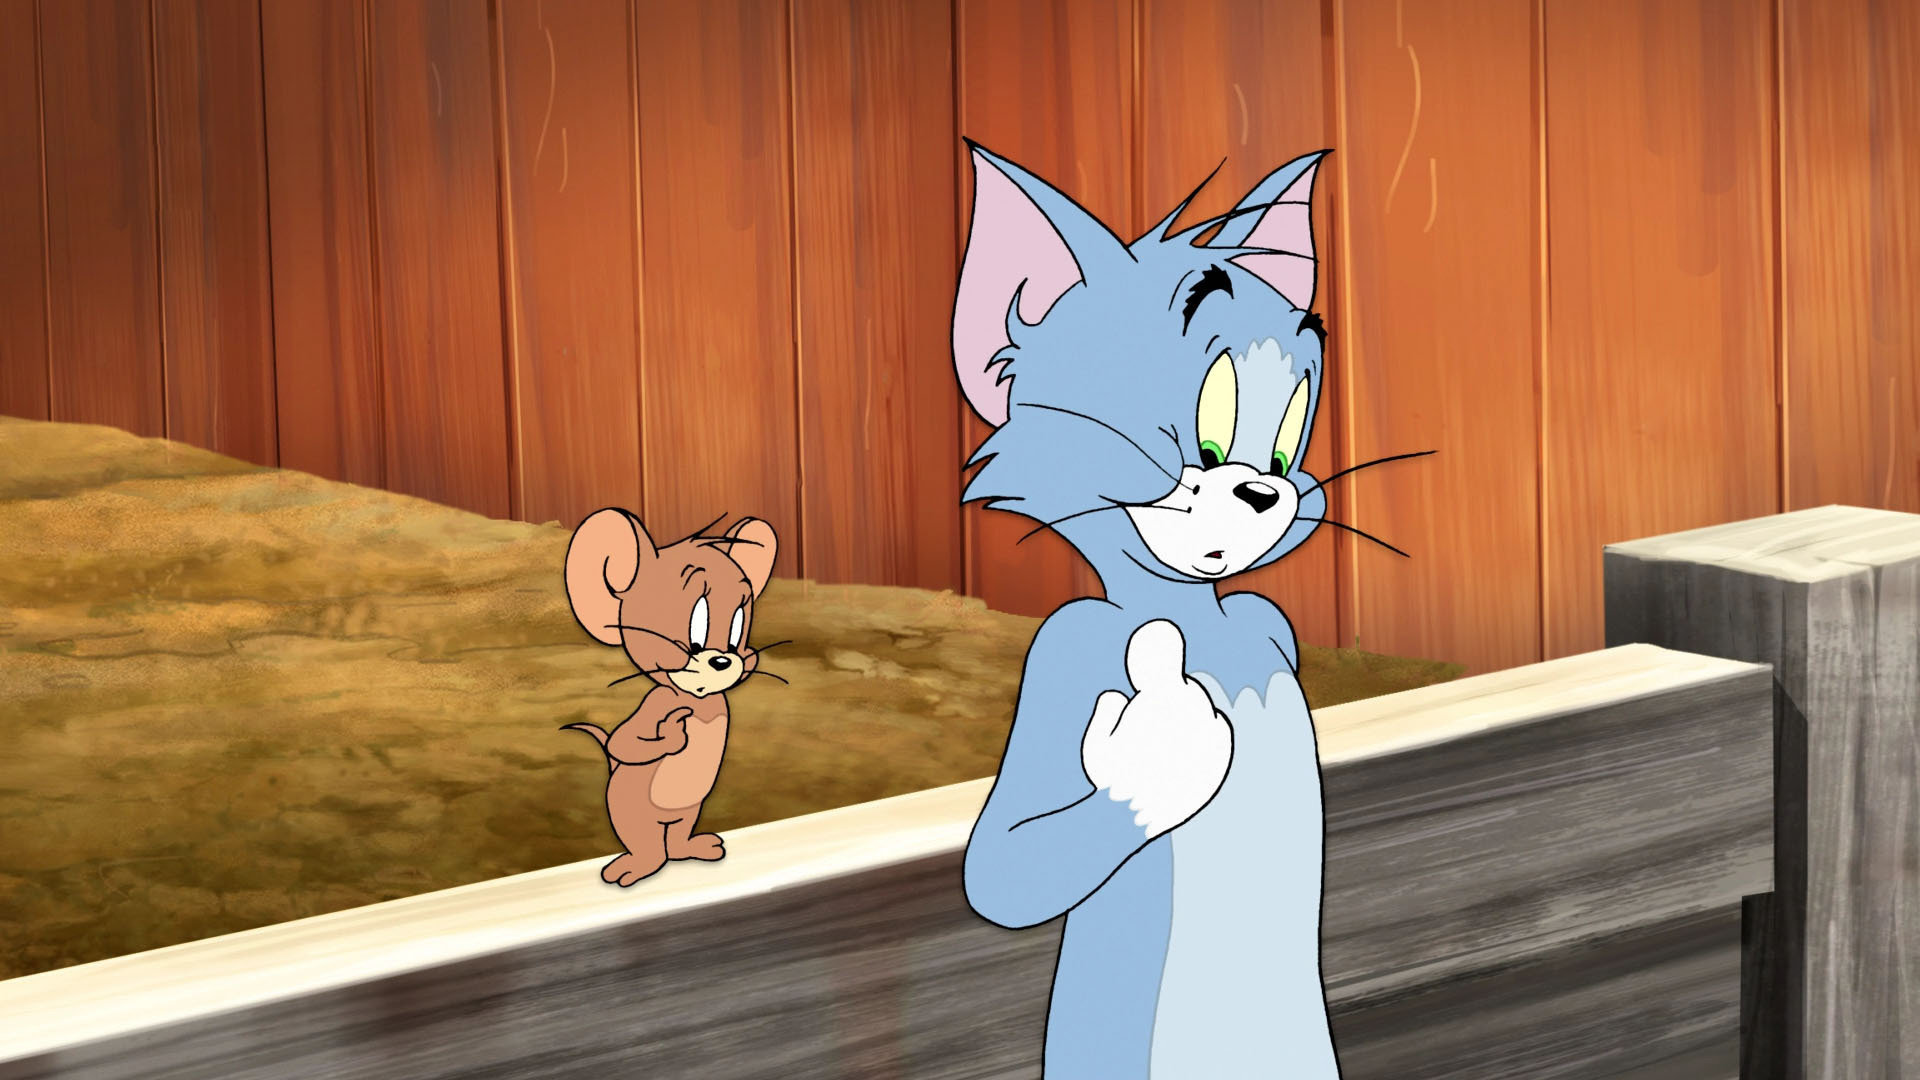 Tom And Jerry wallpaper 1920x1080 Full HD (1080p) desktop background